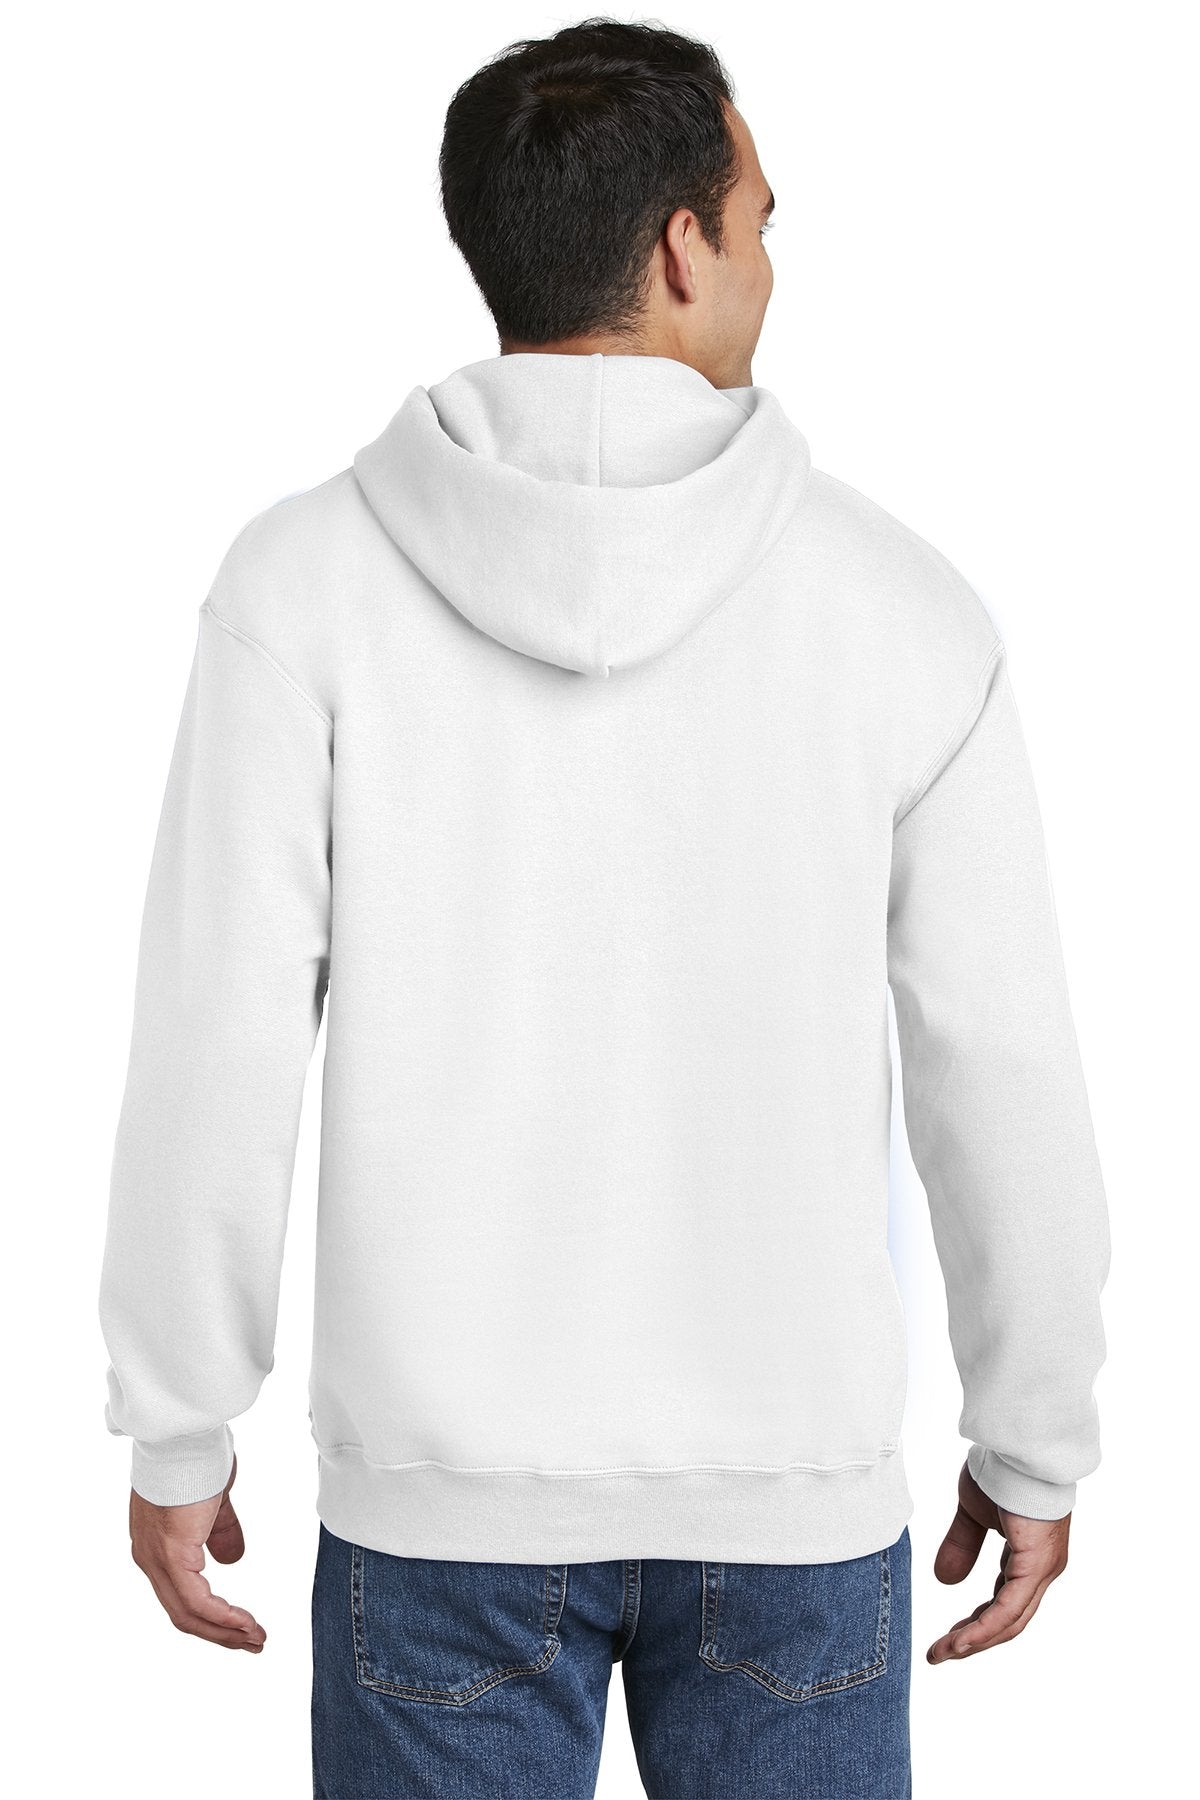 Hanes Ultimate Cotton Pullover Hooded Sweatshirt F170 White